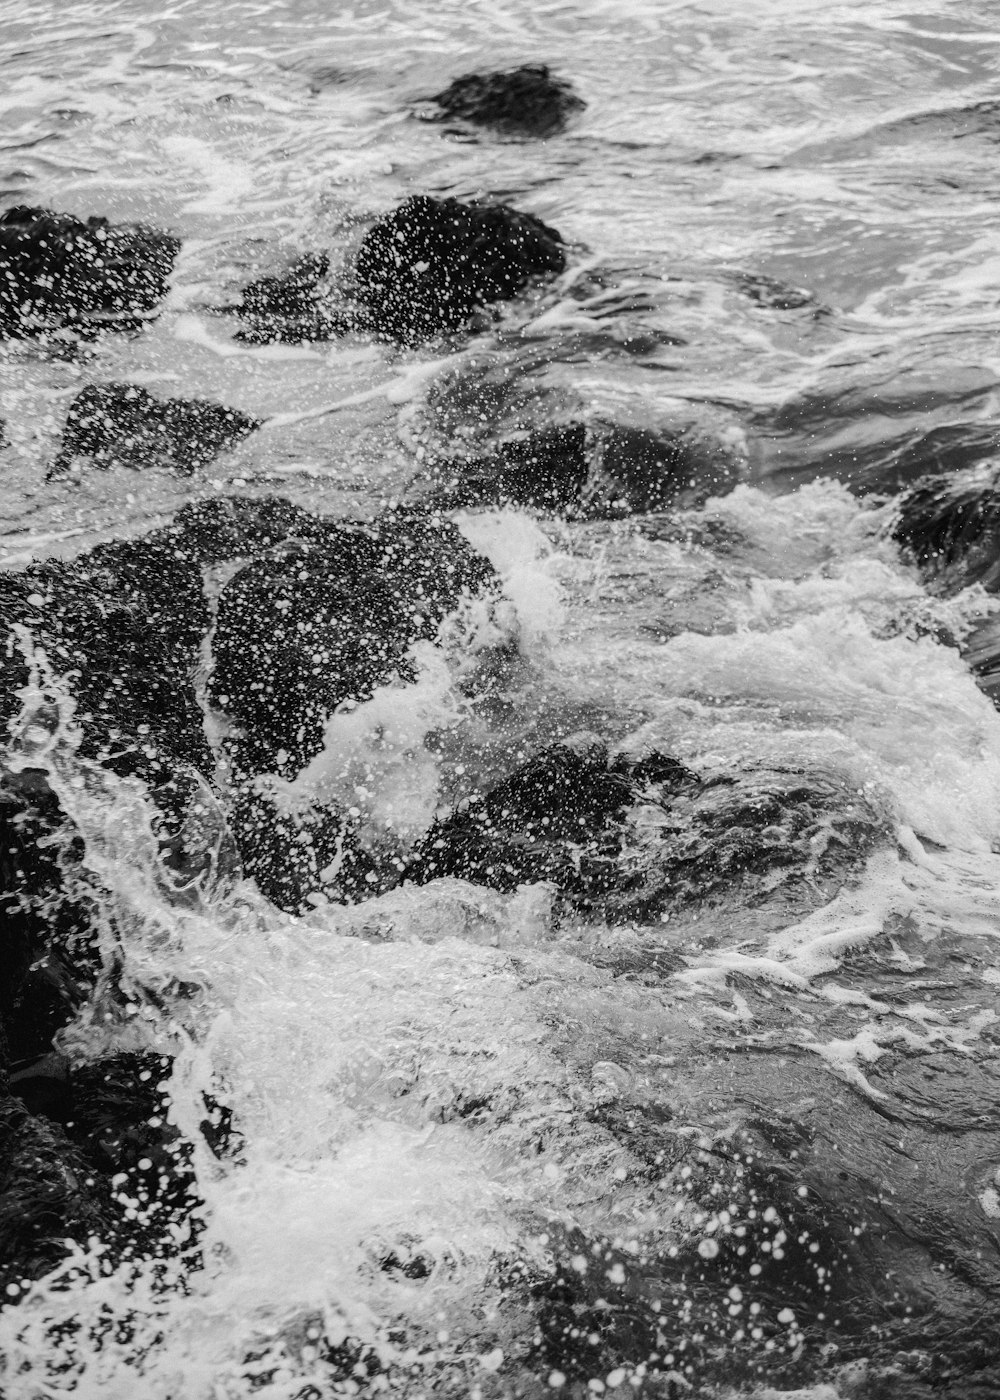 a black and white photo of some rocks in the water